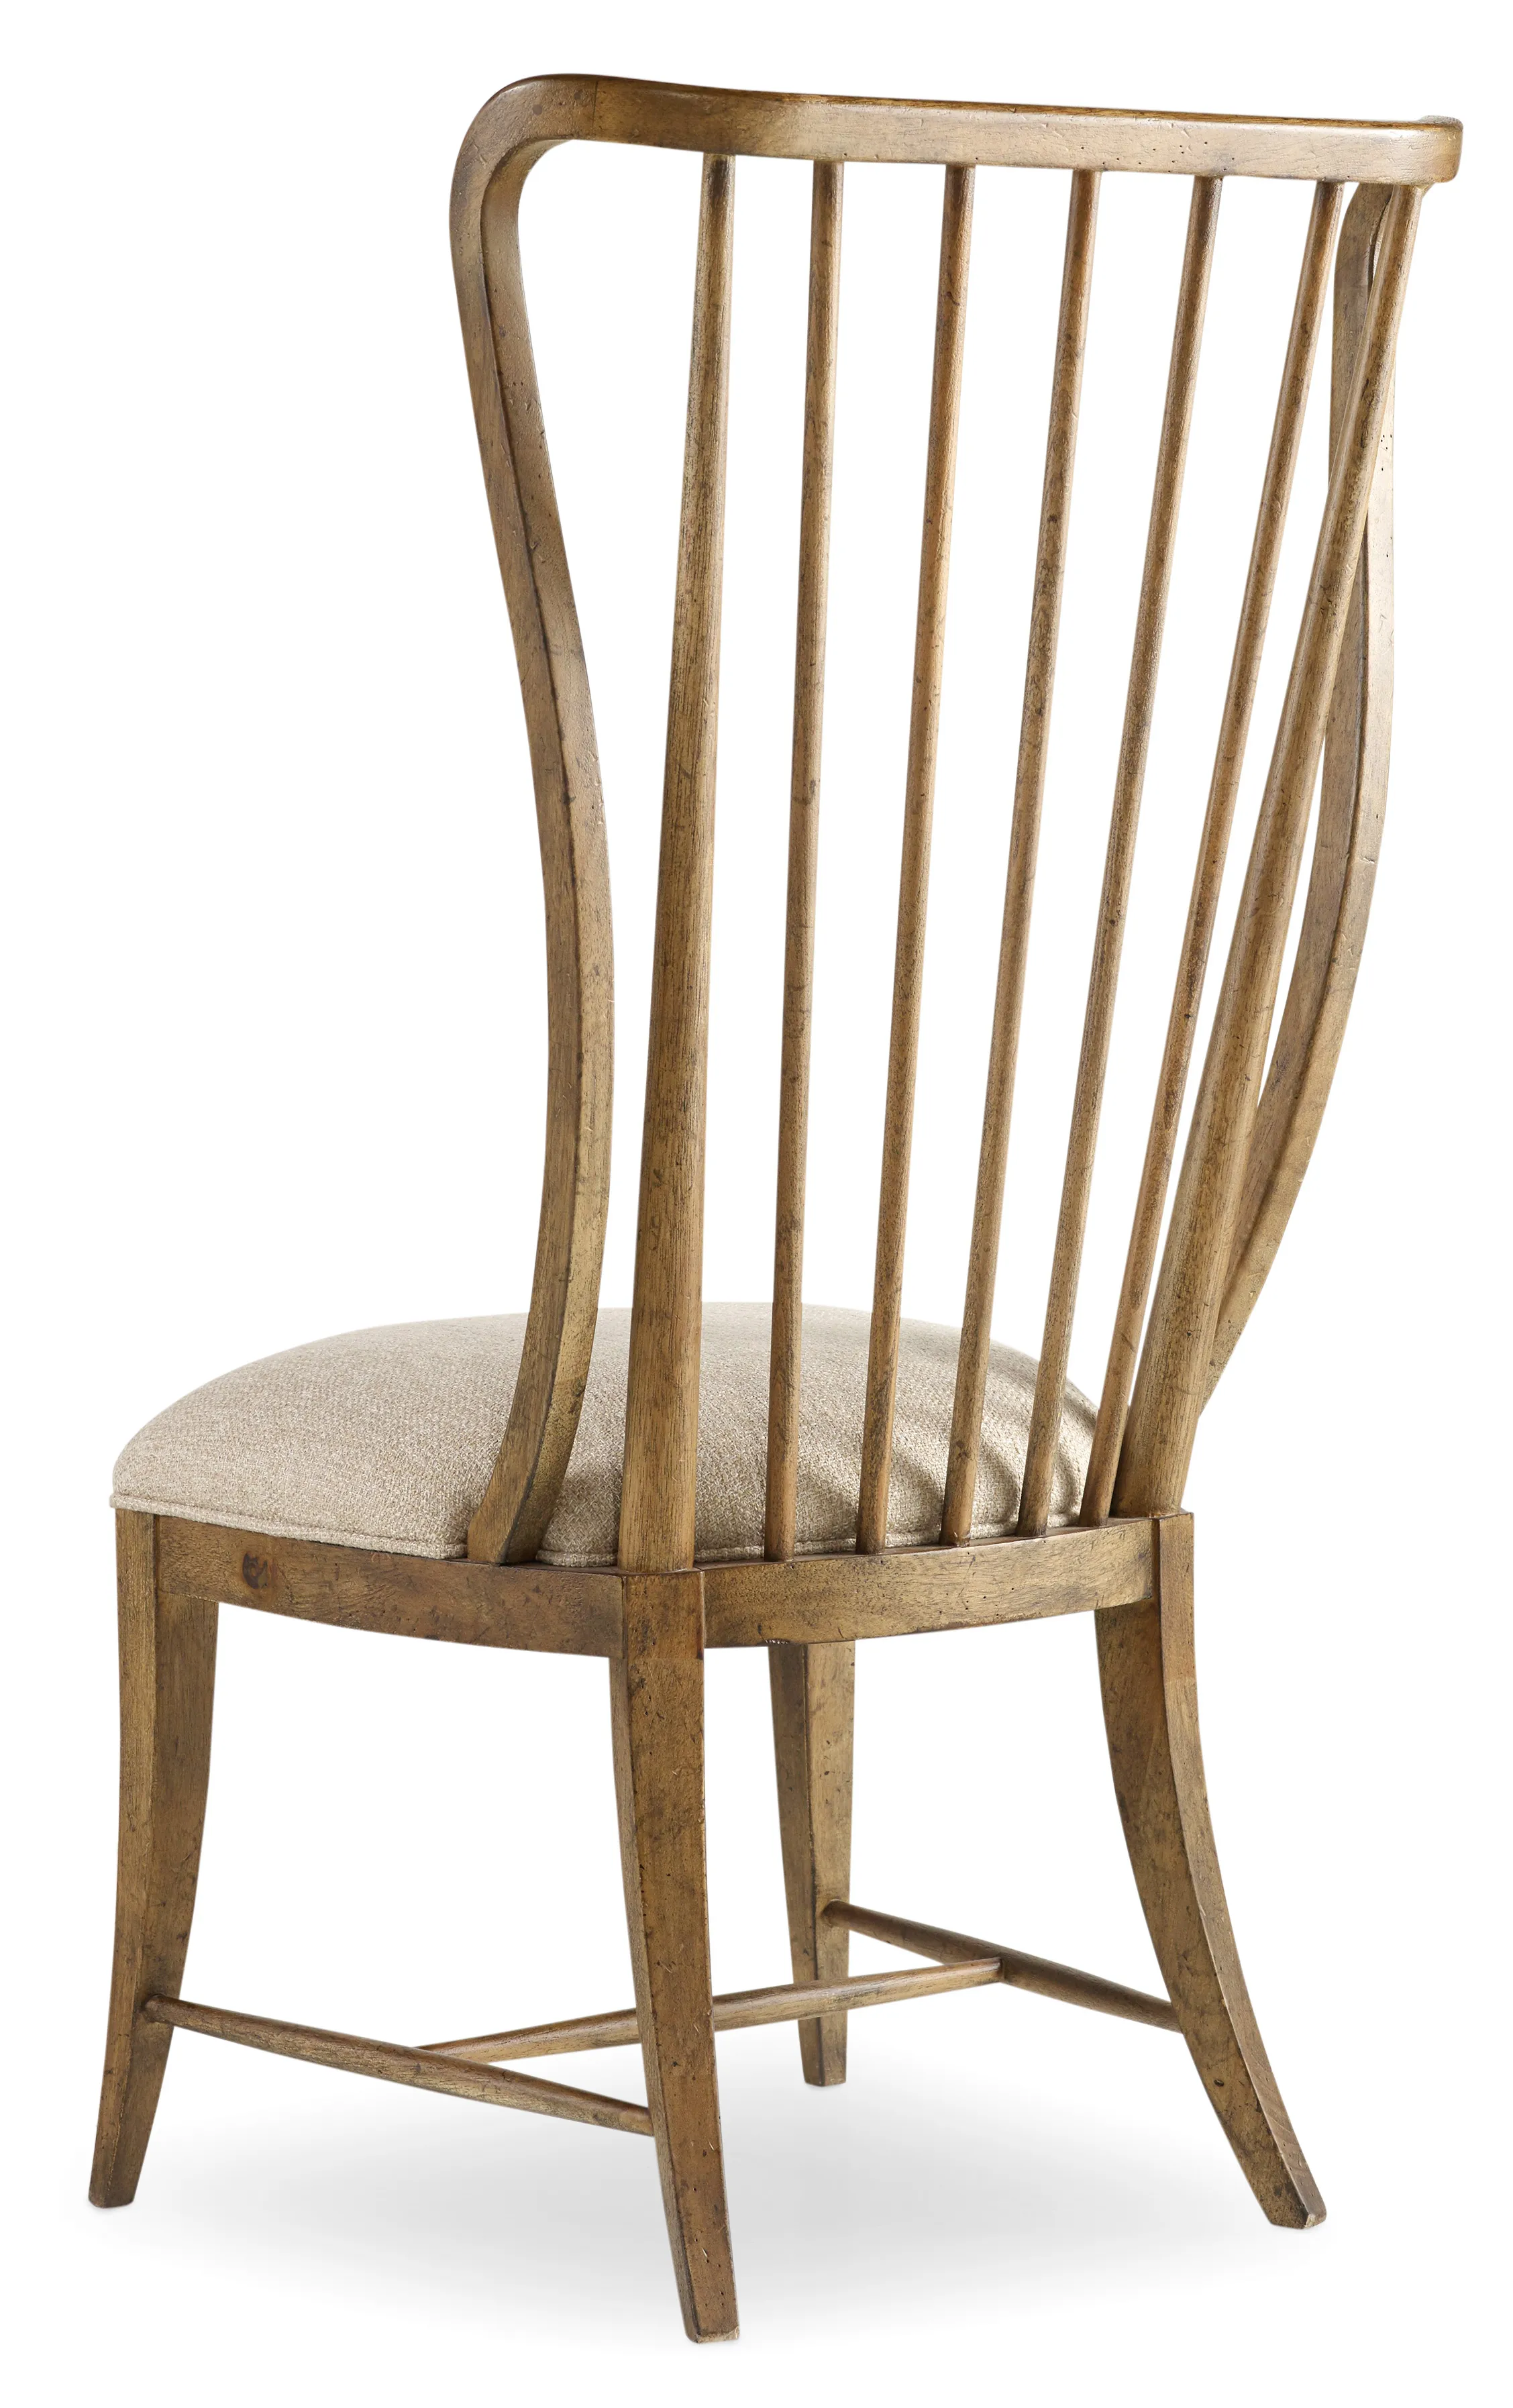 Sanctuary Tall Spindle Side Chair in Beige